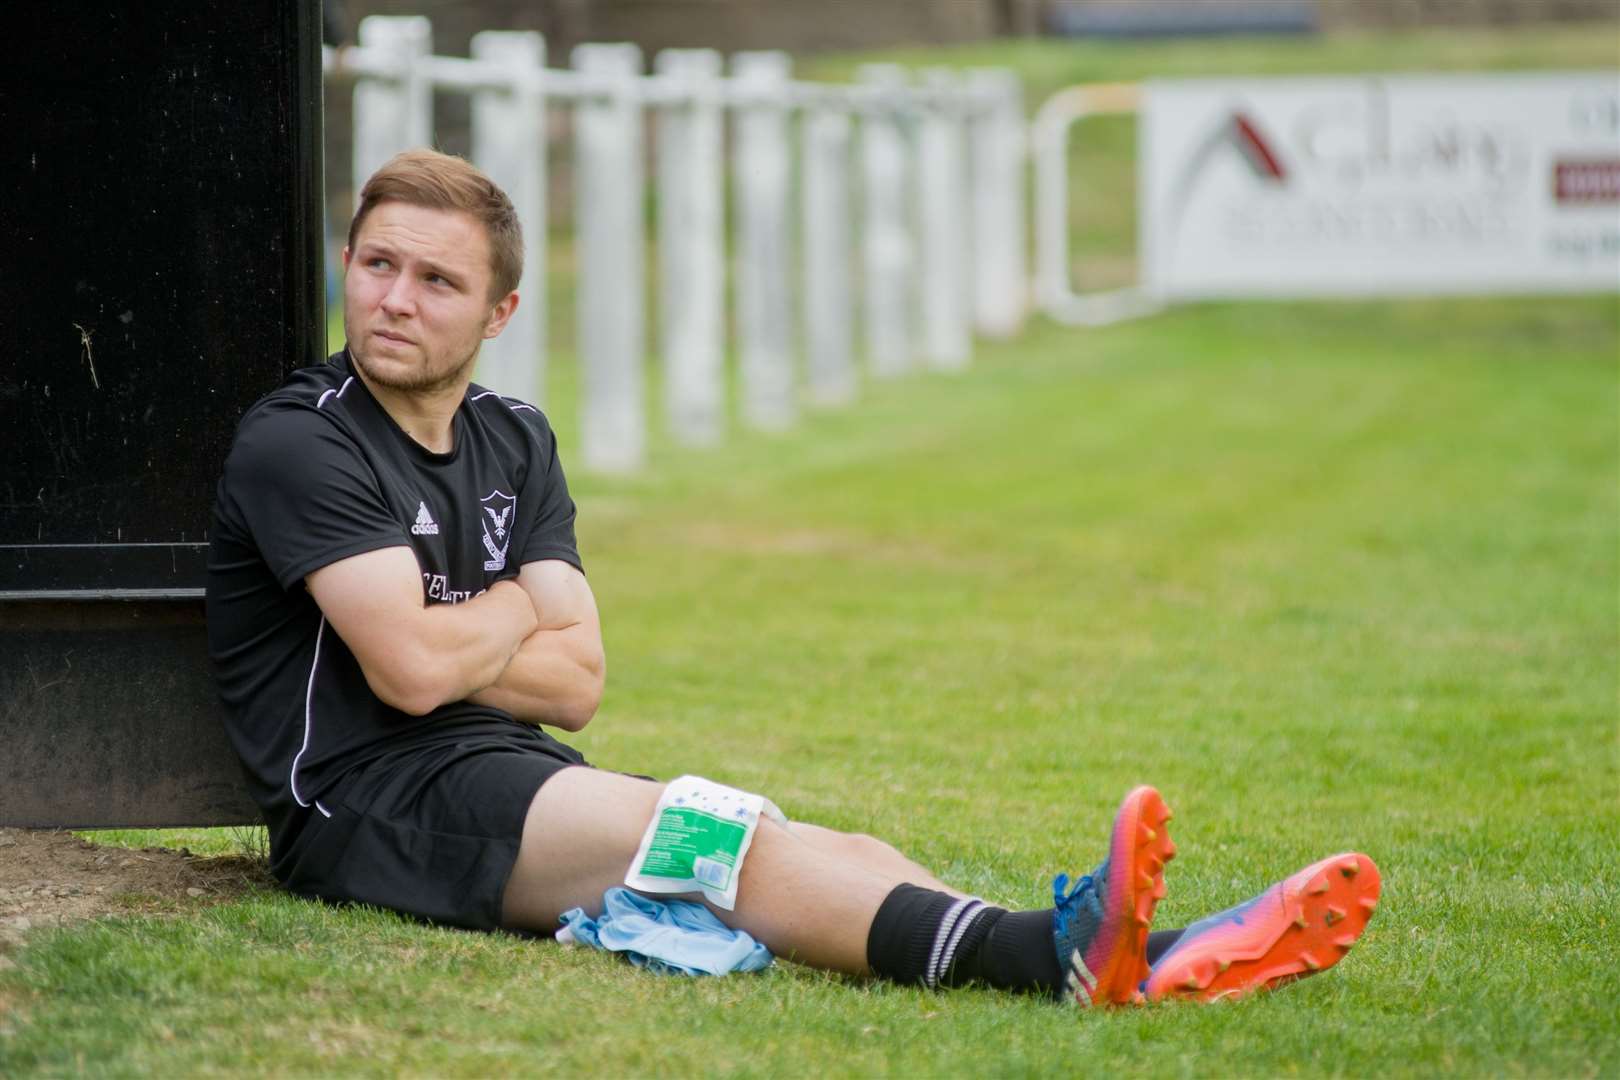 The start of 17 months of misery for Dane Ballard as he lies injured on the sidelines at Rothes in September 2018.